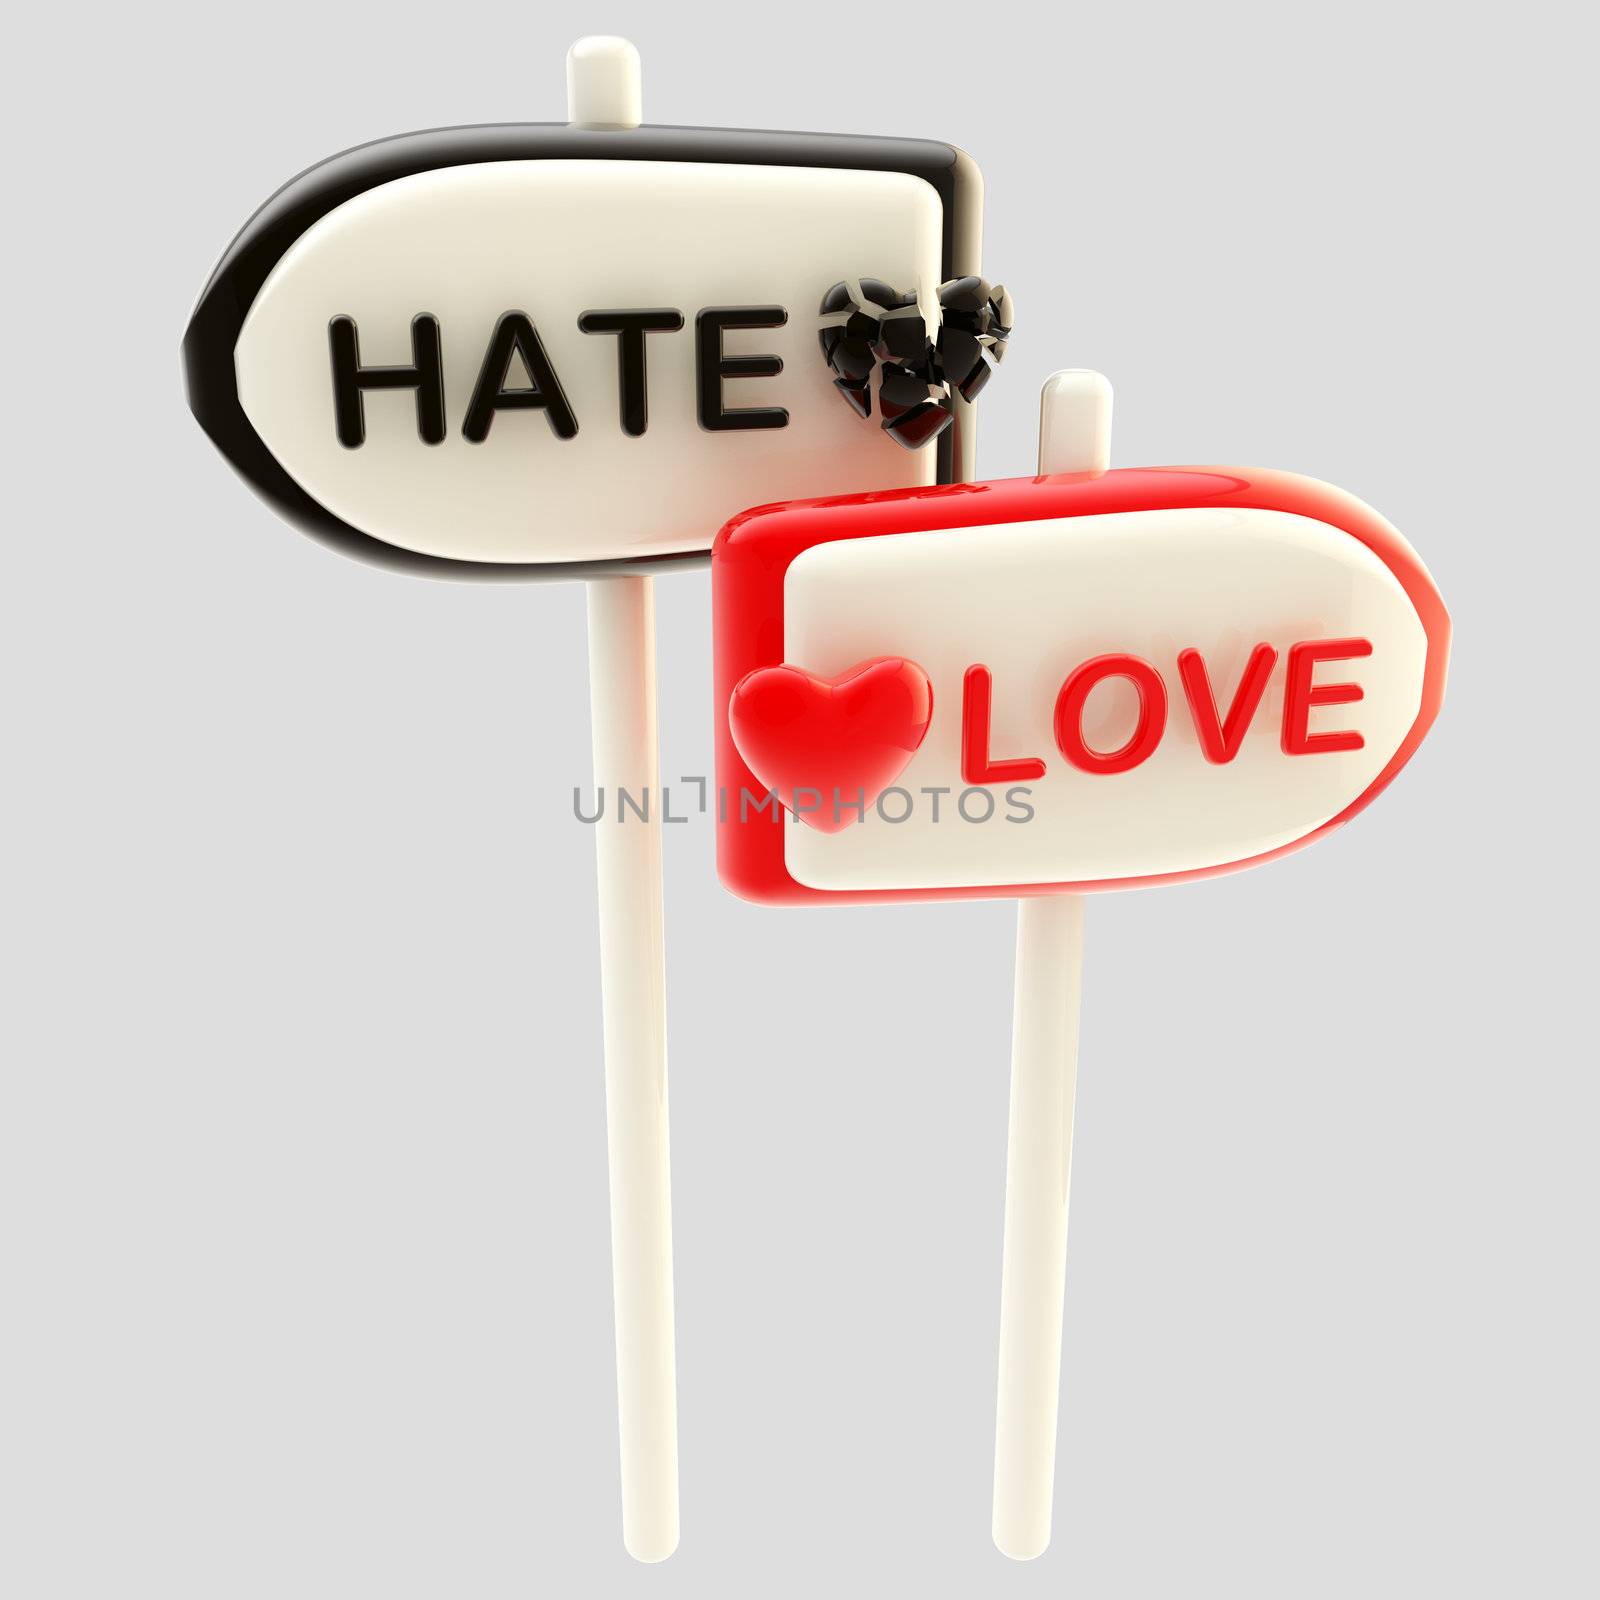 Love and hate glossy signpost signs by nbvf